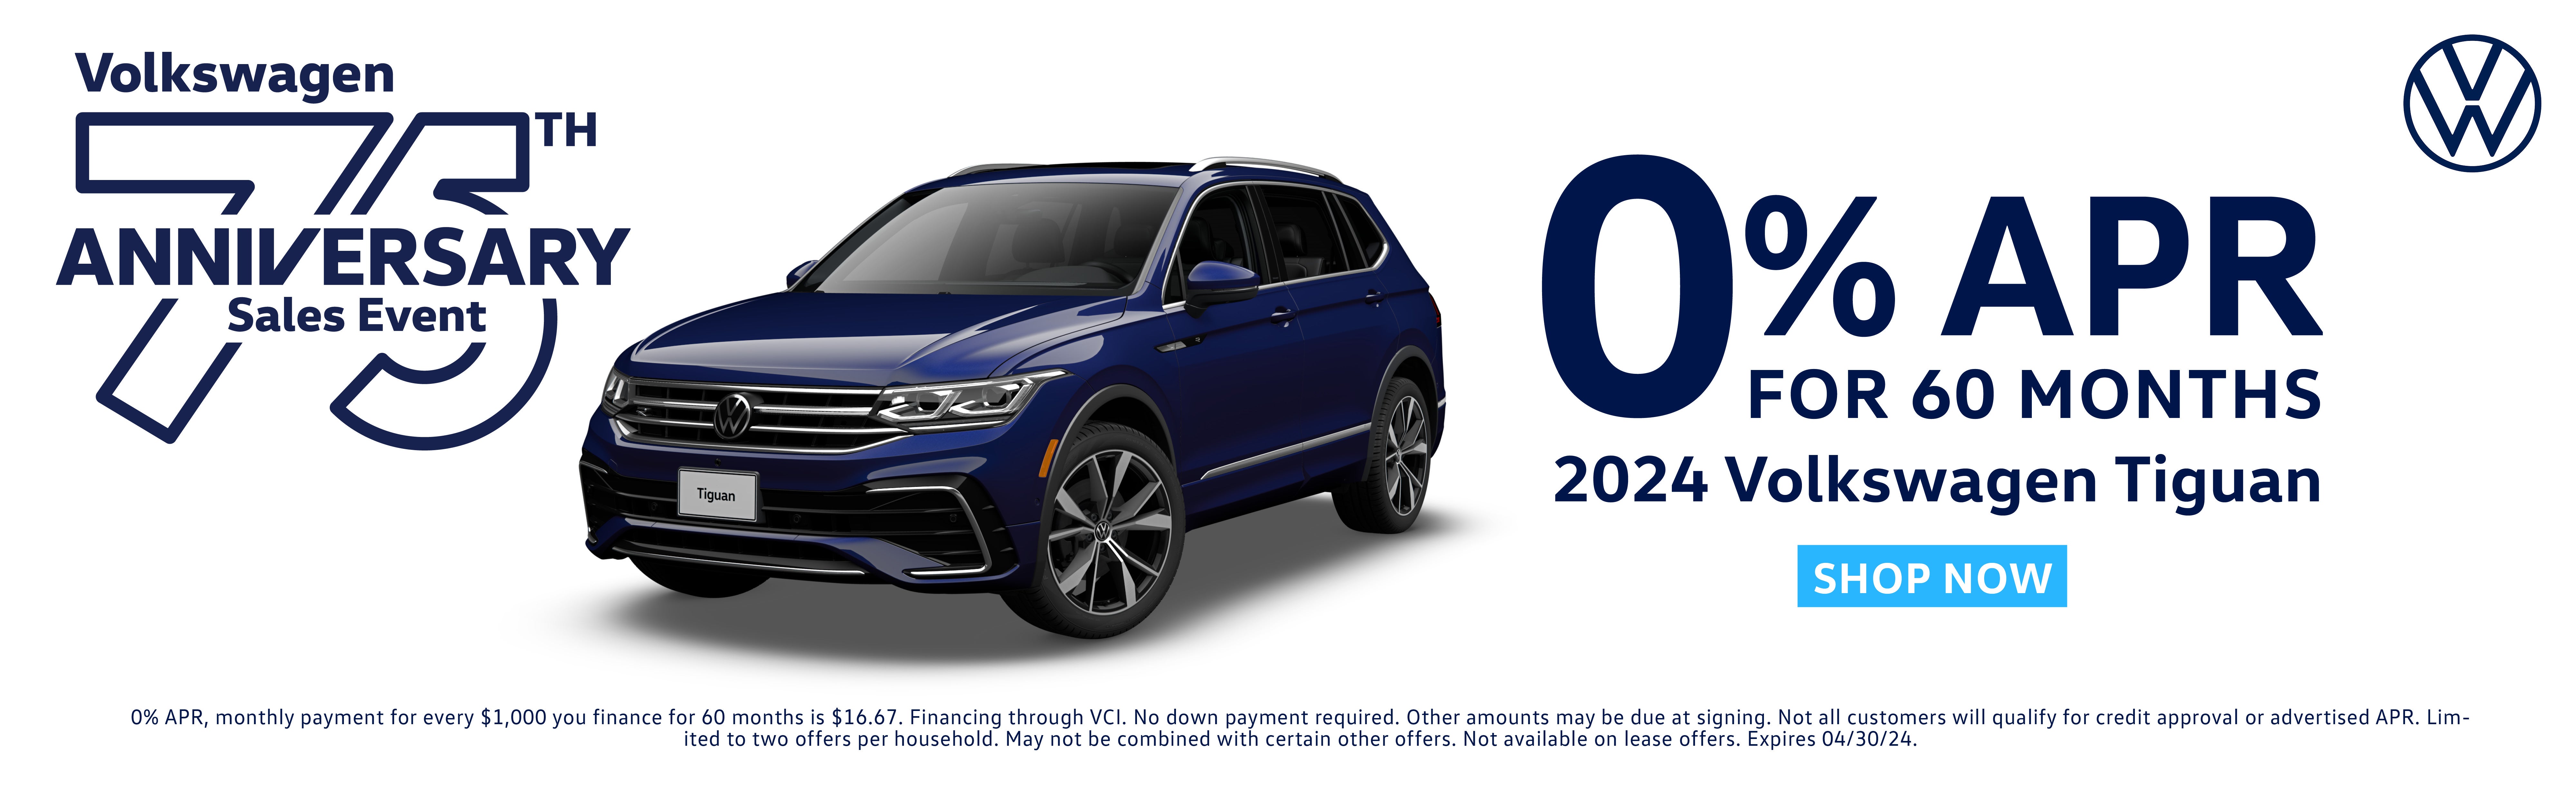 0% APR for 60 Months on 24 Tiguan